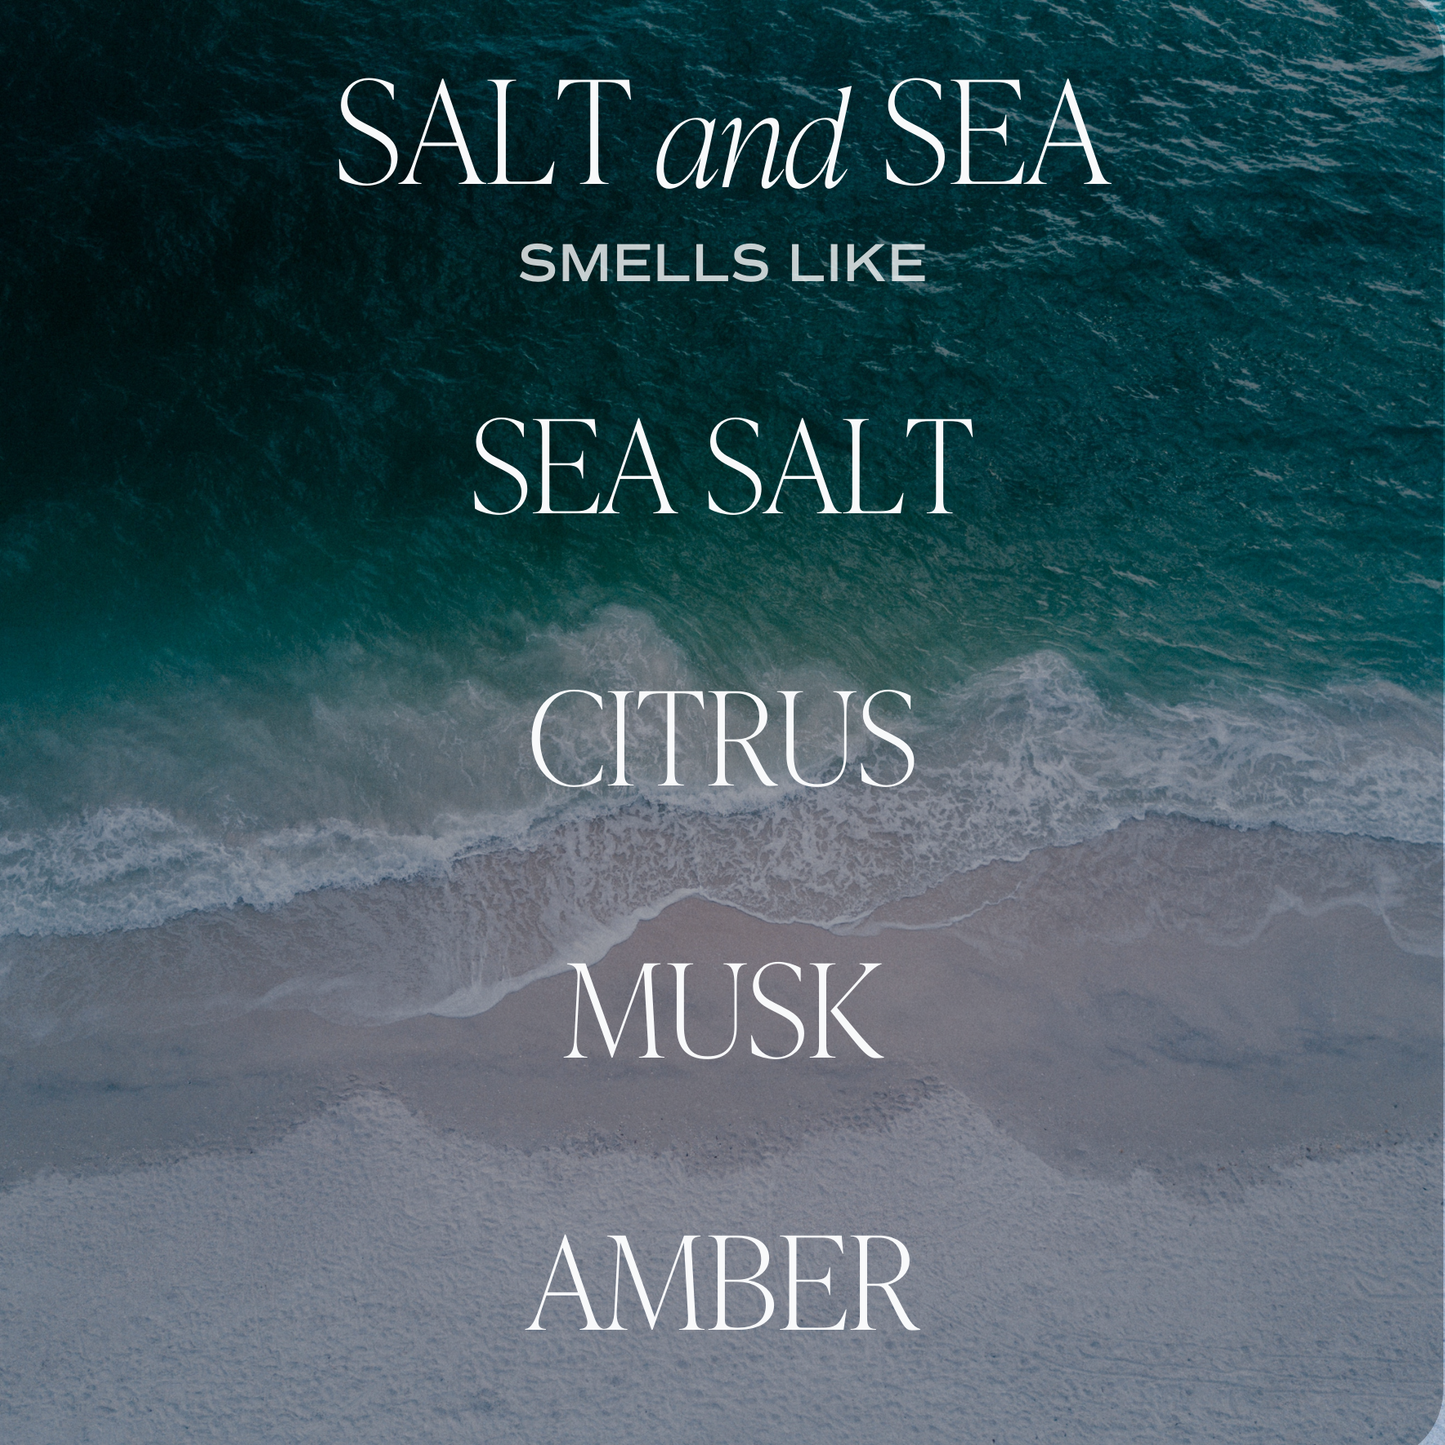 Sweet Water Decor - Salt and Sea - 9 oz. Soy Candle